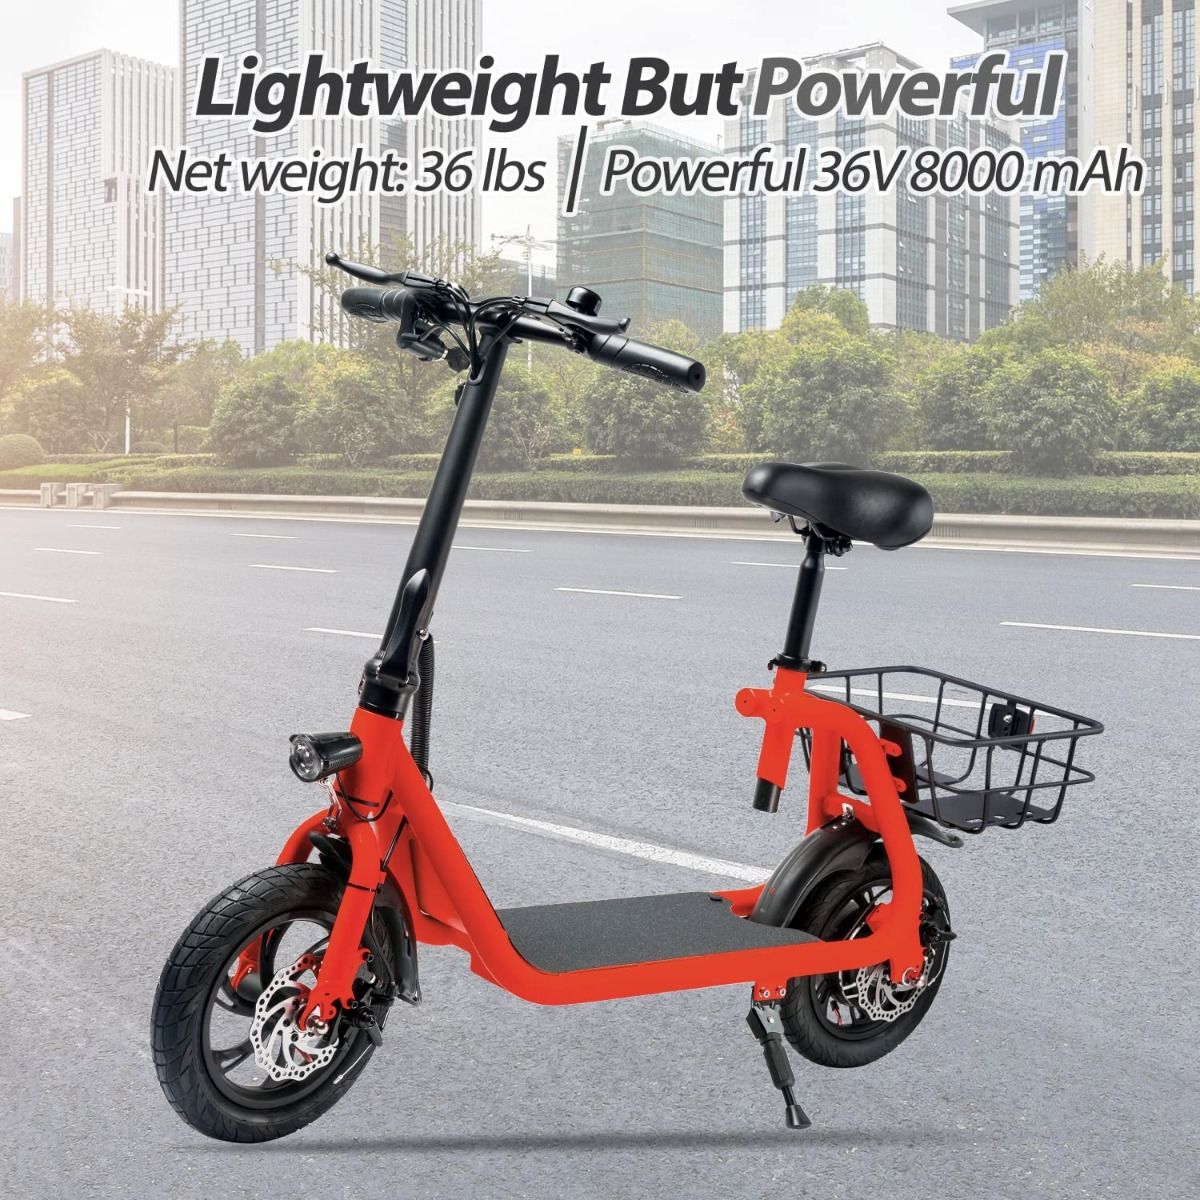 RED - Commuter Electric Scooter for Adults - Foldable Scooter with Seat & Carry Basket